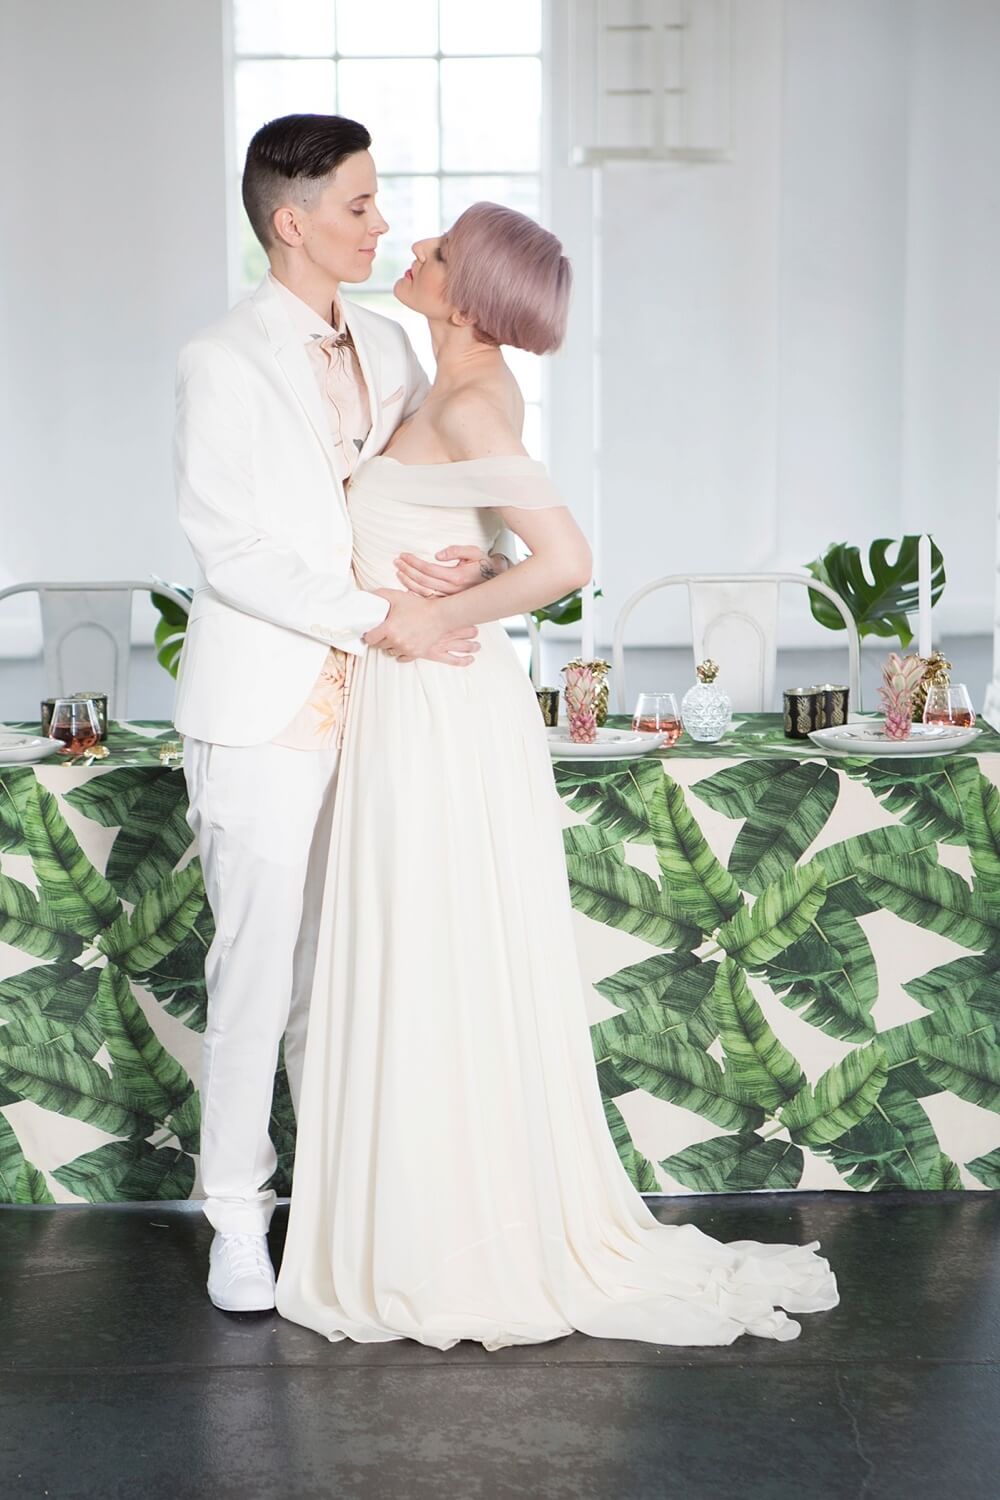 lesbian brides at exotic tropical wedding theme styled shoot by paola de paola via the gay wedding guide 8